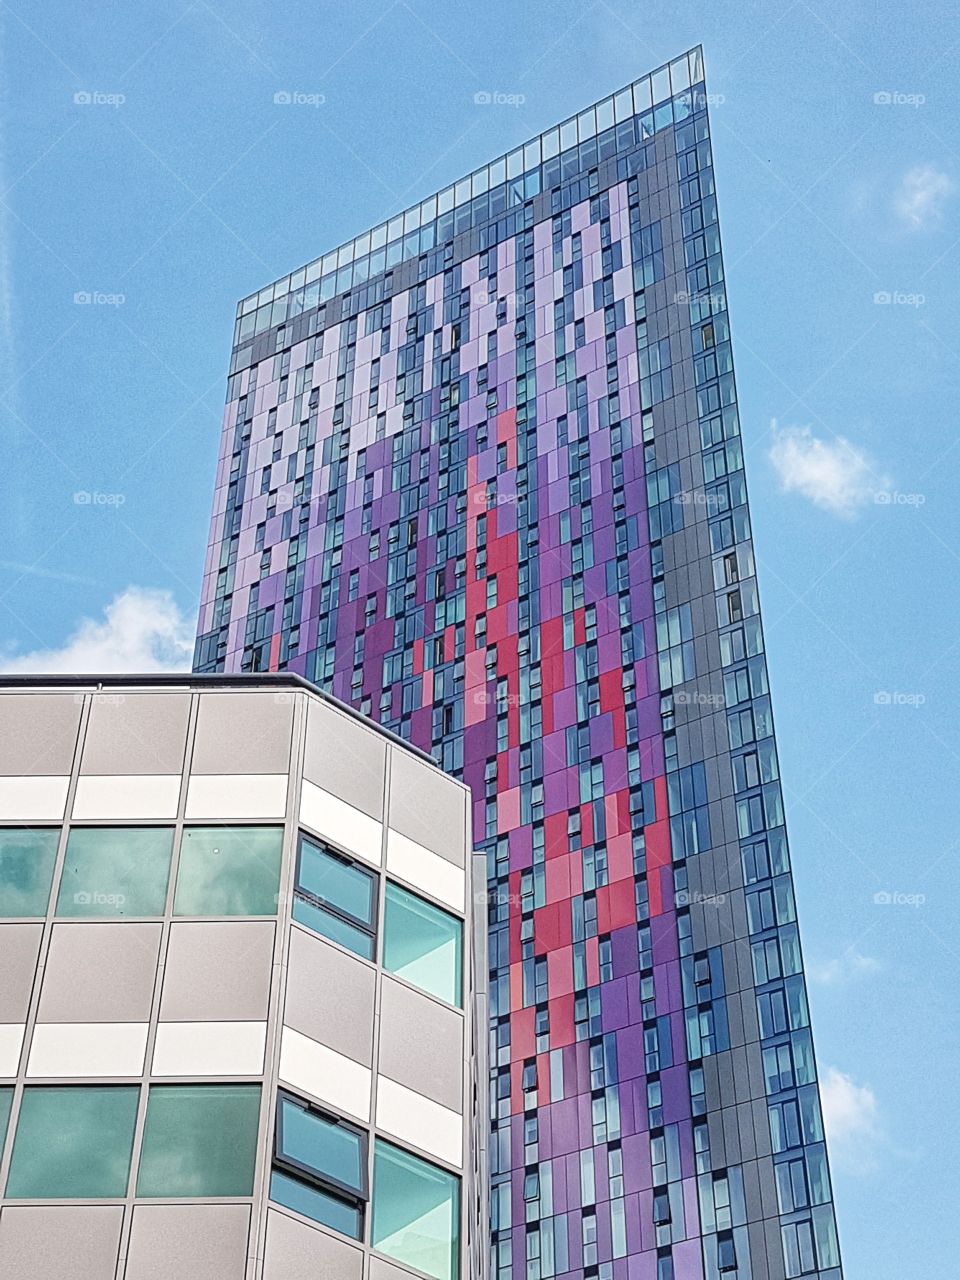 Saffron Square, currently the tallest building in Croydon (2018) UK...